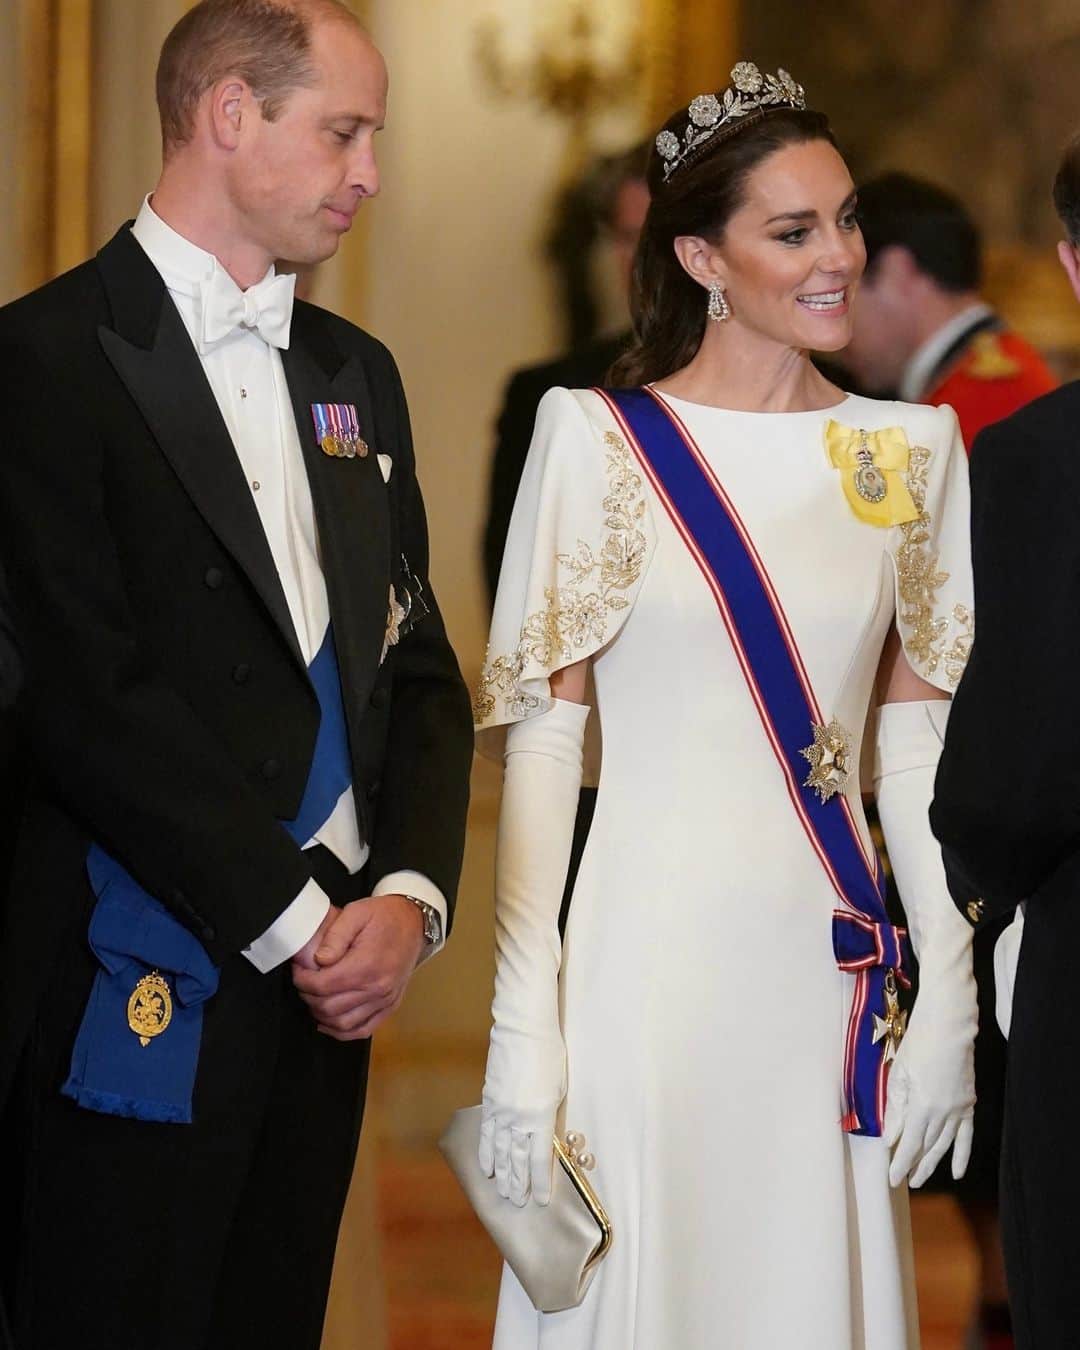 Vogueのインスタグラム：「Tonight, Kate Middleton attended a state dinner at Buckingham Palace in honor of South Korean President Yoon Suk Yeol and First Lady Kim Keon Hee wearing a rare piece of jewelry that most generations of royal watchers will have never seen before: The Strathmore Rose Tiara. The tiara was a wedding gift given to the Queen Mother by her father, Lord Strathmore, before she married the Duke of York in 1923 and hasn’t been worn in public since the 1930s. Tap the link in bio to learn more.」